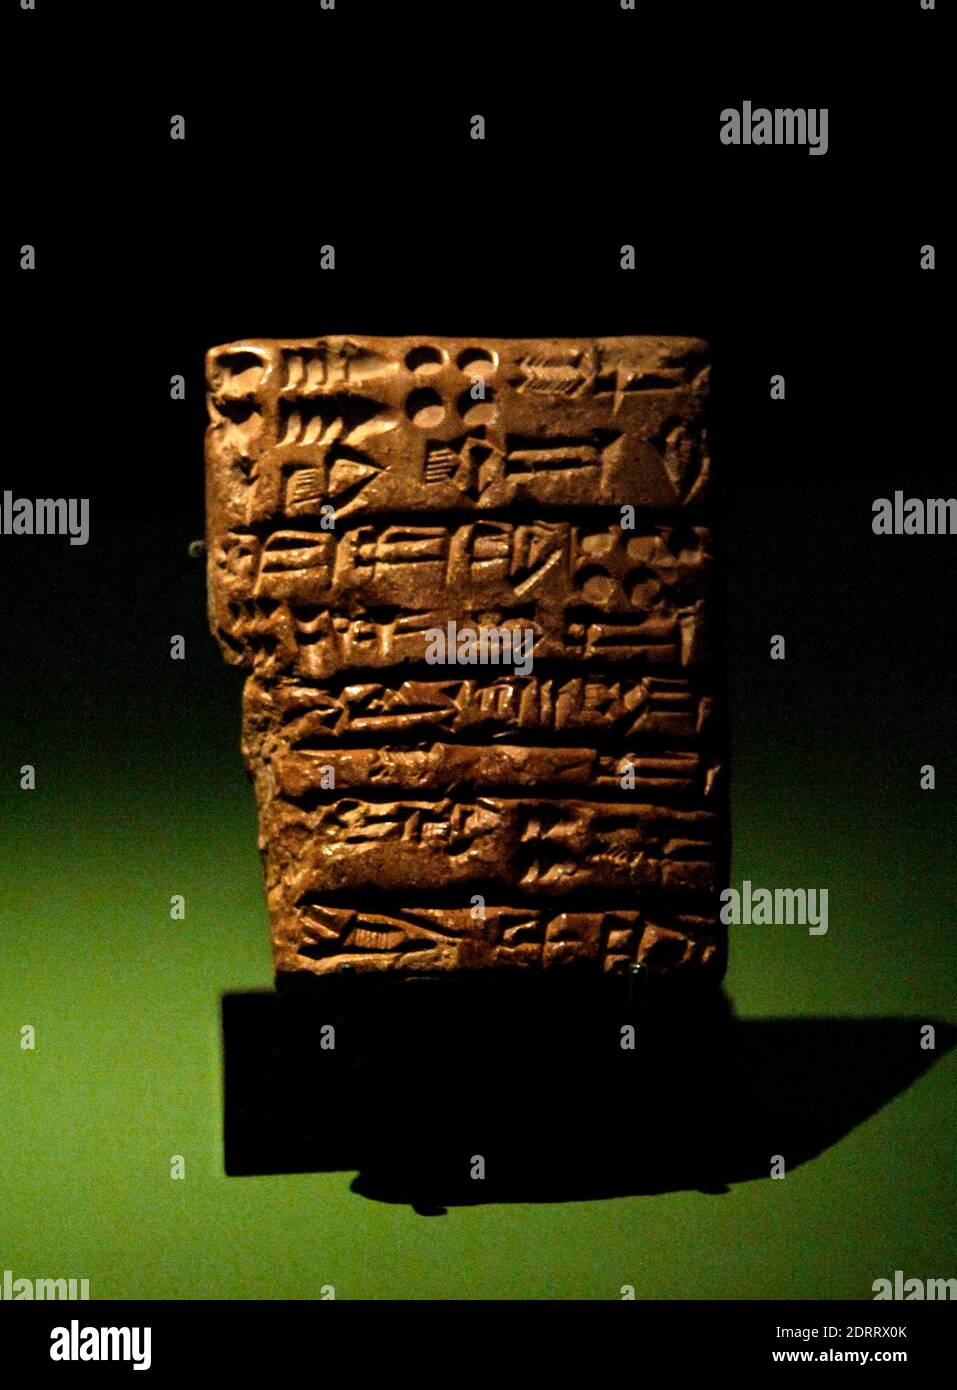 Tablet in Akkadian language. Economic text dated to the third year of Shar-Kali-Sharri's reign (c. 2217 BC-2293 BC). Clay. From Girsu (now Tello). Louvre Museum. Paris, France. Stock Photo